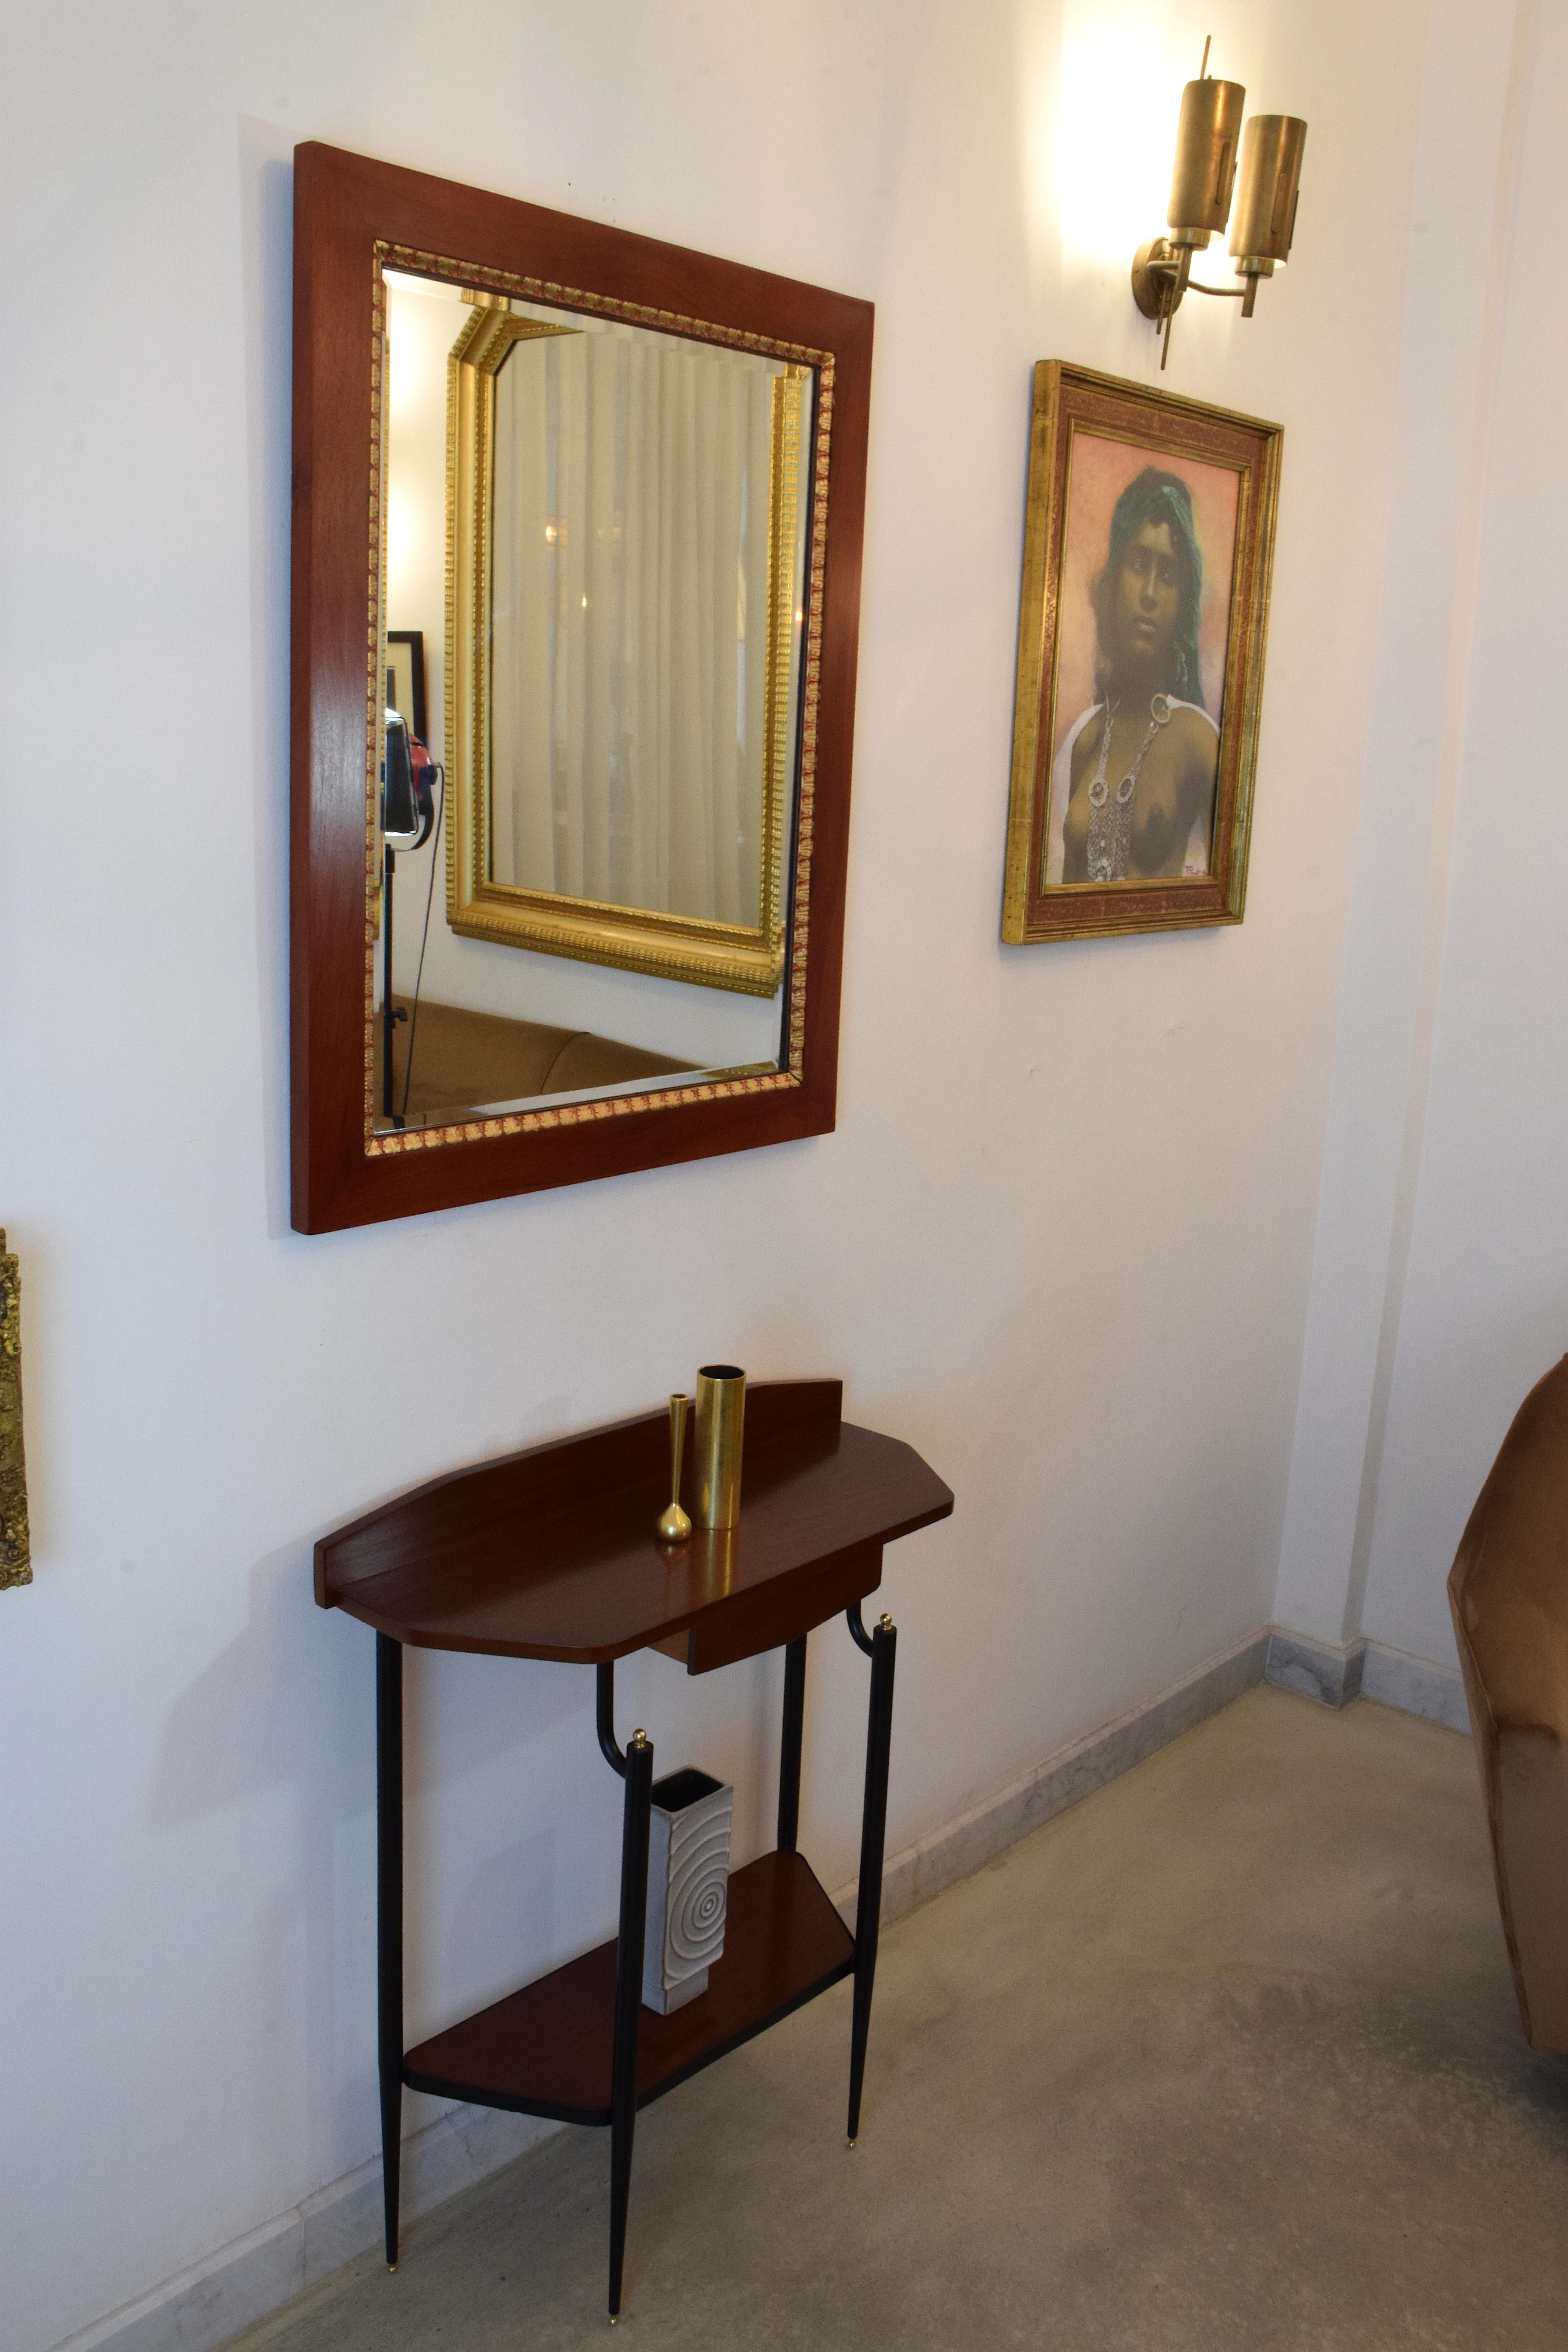 A set of two Italian early 20th century rectangular glass mirrors circa 1920s set with delicate sculpted bronze and gold leaf details.
Italy, circa 1920s.

----
We are an exhibition space and an online destination established by Jonathan Amar